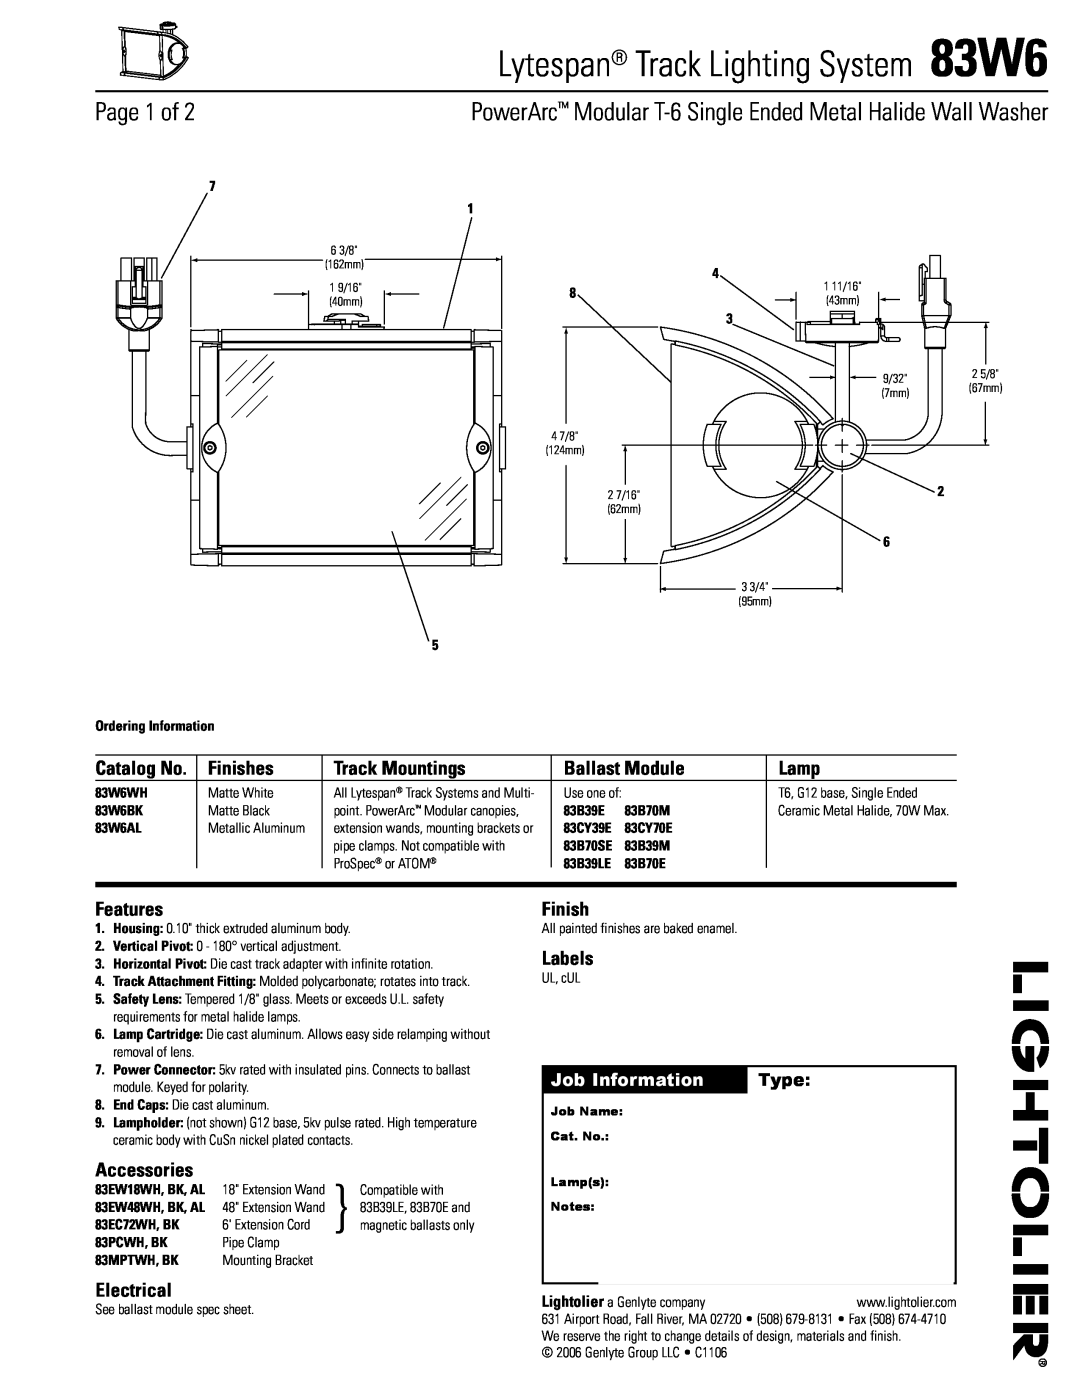 Lightolier manual Lytespan Track Lighting System 83W6, Page 1 of, Finishes, Track Mountings, Ballast Module, Lamp, Type 